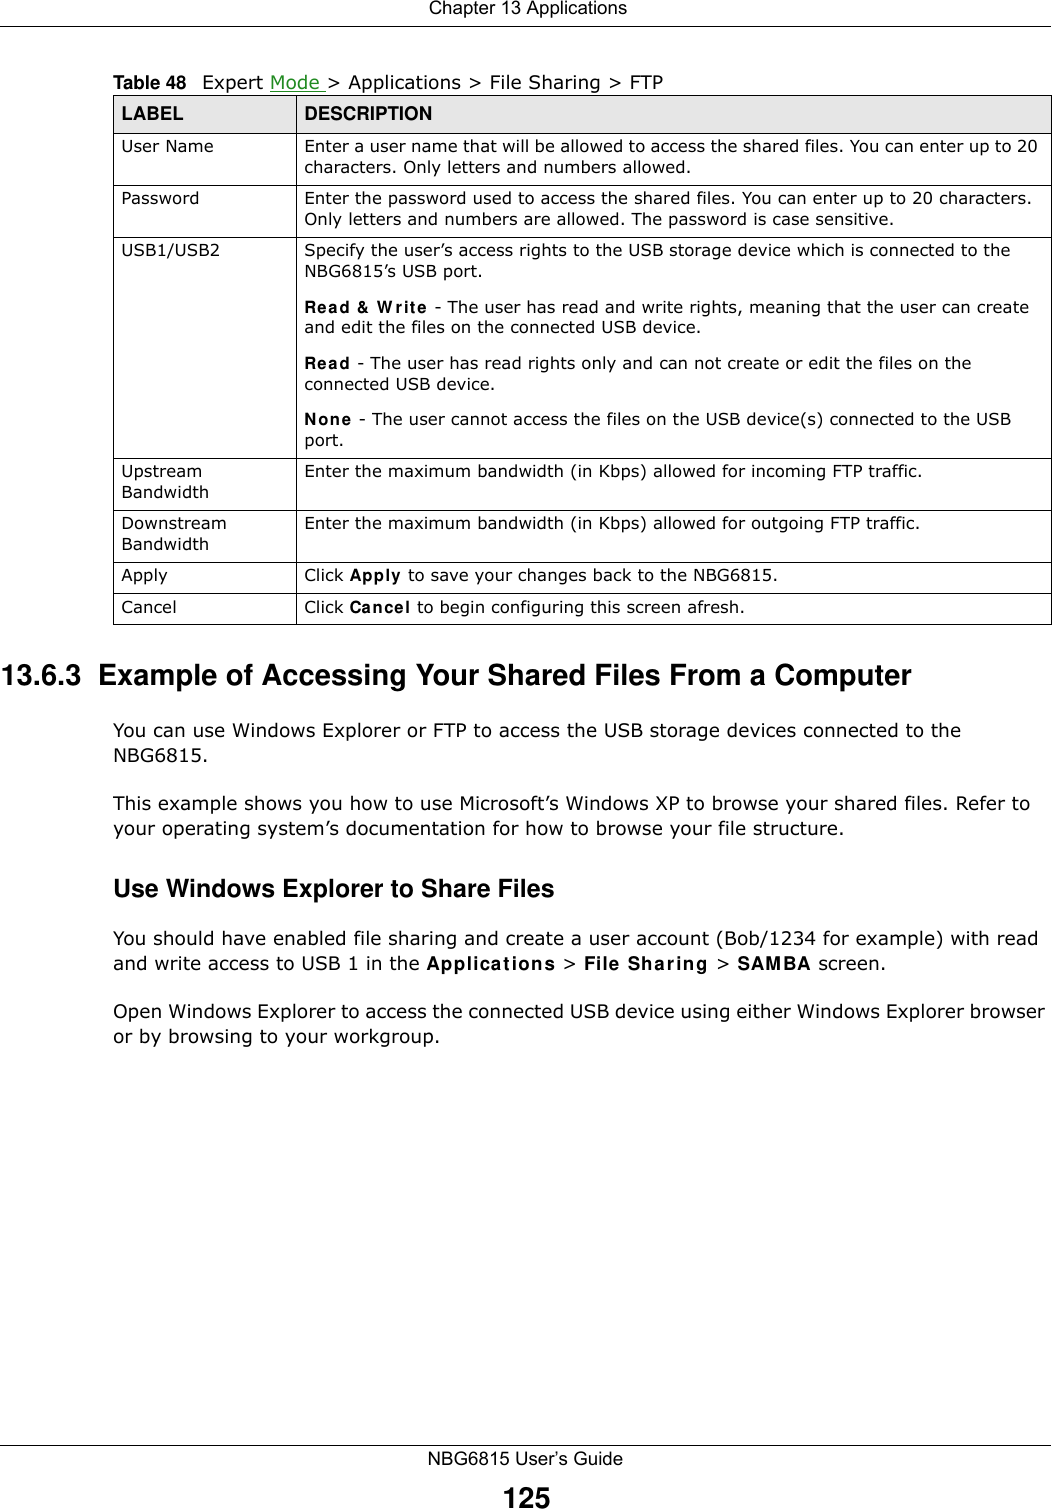  Chapter 13 ApplicationsNBG6815 User’s Guide12513.6.3  Example of Accessing Your Shared Files From a Computer You can use Windows Explorer or FTP to access the USB storage devices connected to the NBG6815.This example shows you how to use Microsoft’s Windows XP to browse your shared files. Refer to your operating system’s documentation for how to browse your file structure. Use Windows Explorer to Share Files You should have enabled file sharing and create a user account (Bob/1234 for example) with read and write access to USB 1 in the Applications &gt; File Sharing &gt; SAMBA screen.Open Windows Explorer to access the connected USB device using either Windows Explorer browser or by browsing to your workgroup.User Name Enter a user name that will be allowed to access the shared files. You can enter up to 20 characters. Only letters and numbers allowed.Password Enter the password used to access the shared files. You can enter up to 20 characters. Only letters and numbers are allowed. The password is case sensitive.USB1/USB2 Specify the user’s access rights to the USB storage device which is connected to the NBG6815’s USB port.Read &amp; Write - The user has read and write rights, meaning that the user can create and edit the files on the connected USB device.Read - The user has read rights only and can not create or edit the files on the connected USB device.None - The user cannot access the files on the USB device(s) connected to the USB port.Upstream BandwidthEnter the maximum bandwidth (in Kbps) allowed for incoming FTP traffic.Downstream BandwidthEnter the maximum bandwidth (in Kbps) allowed for outgoing FTP traffic.Apply Click Apply to save your changes back to the NBG6815.Cancel Click Cancel to begin configuring this screen afresh.Table 48   Expert Mode &gt; Applications &gt; File Sharing &gt; FTP LABEL DESCRIPTION